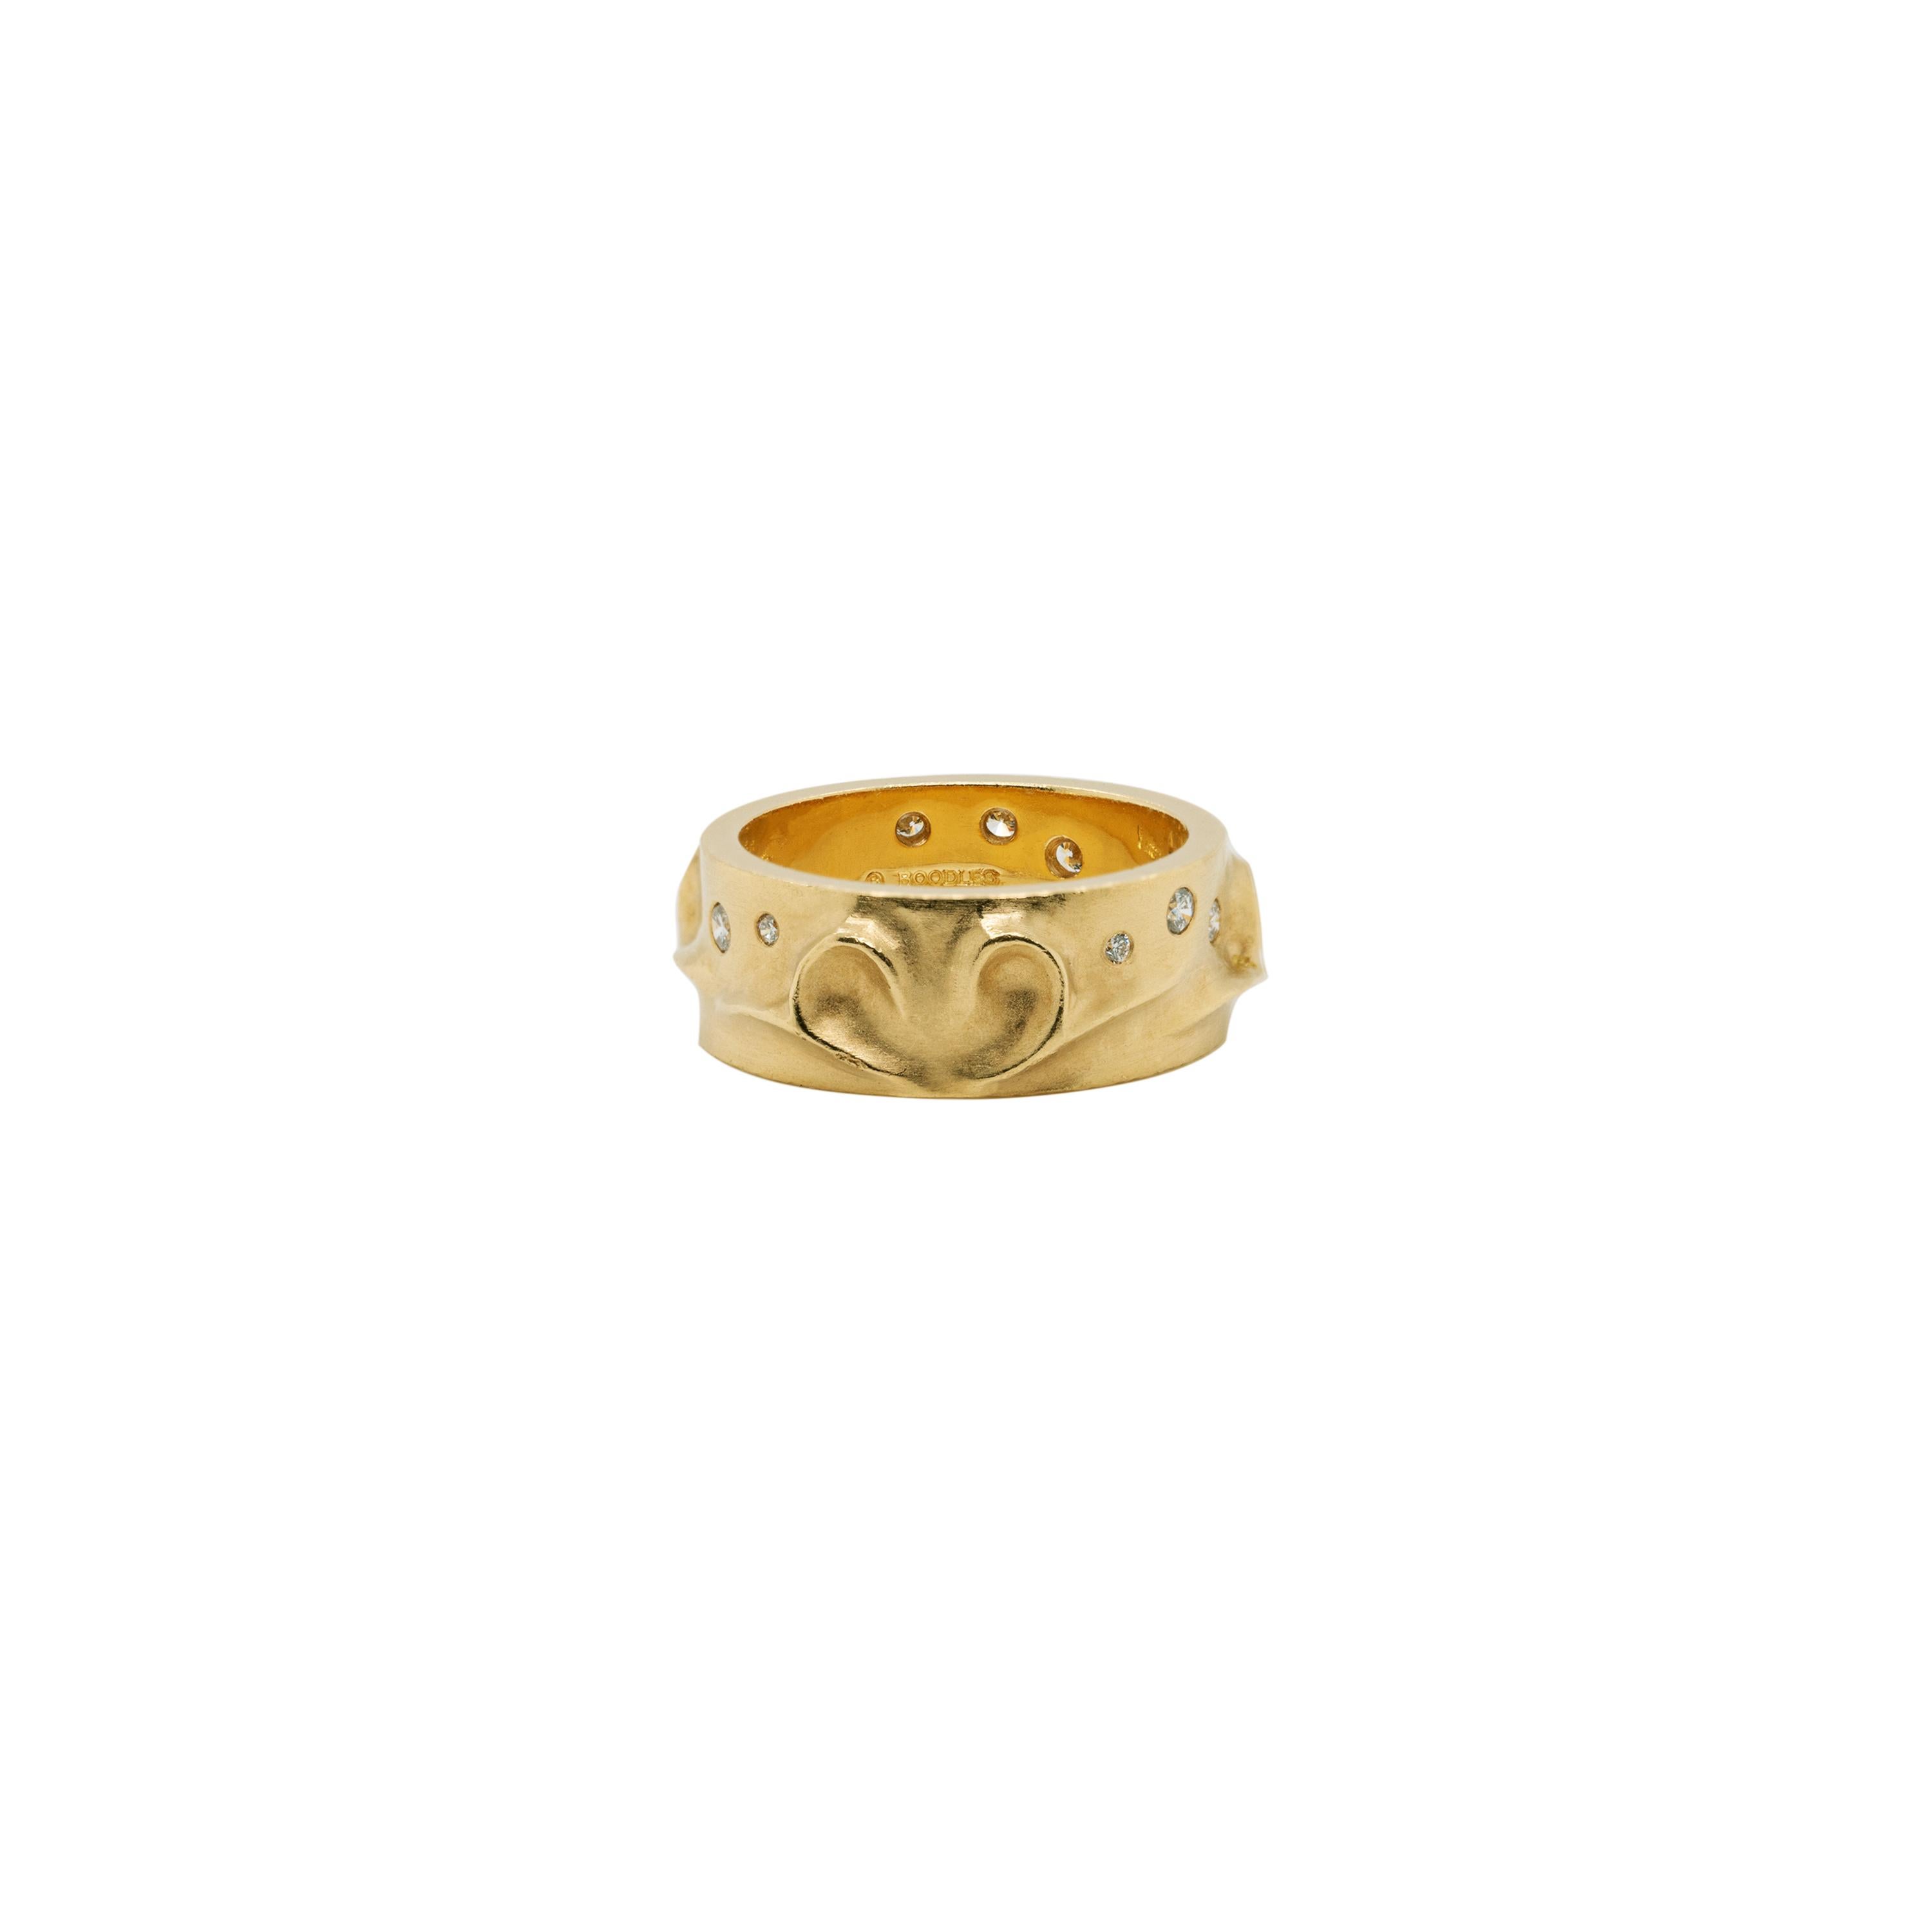 This wonderful ring and earring set designed by Boodle and Dunthorne has been crafted in 18 carat yellow gold. The earrings and ring are decorated with a raised pattern throughout in a beautiful matte finish. The earrings are inlaid with 6 round